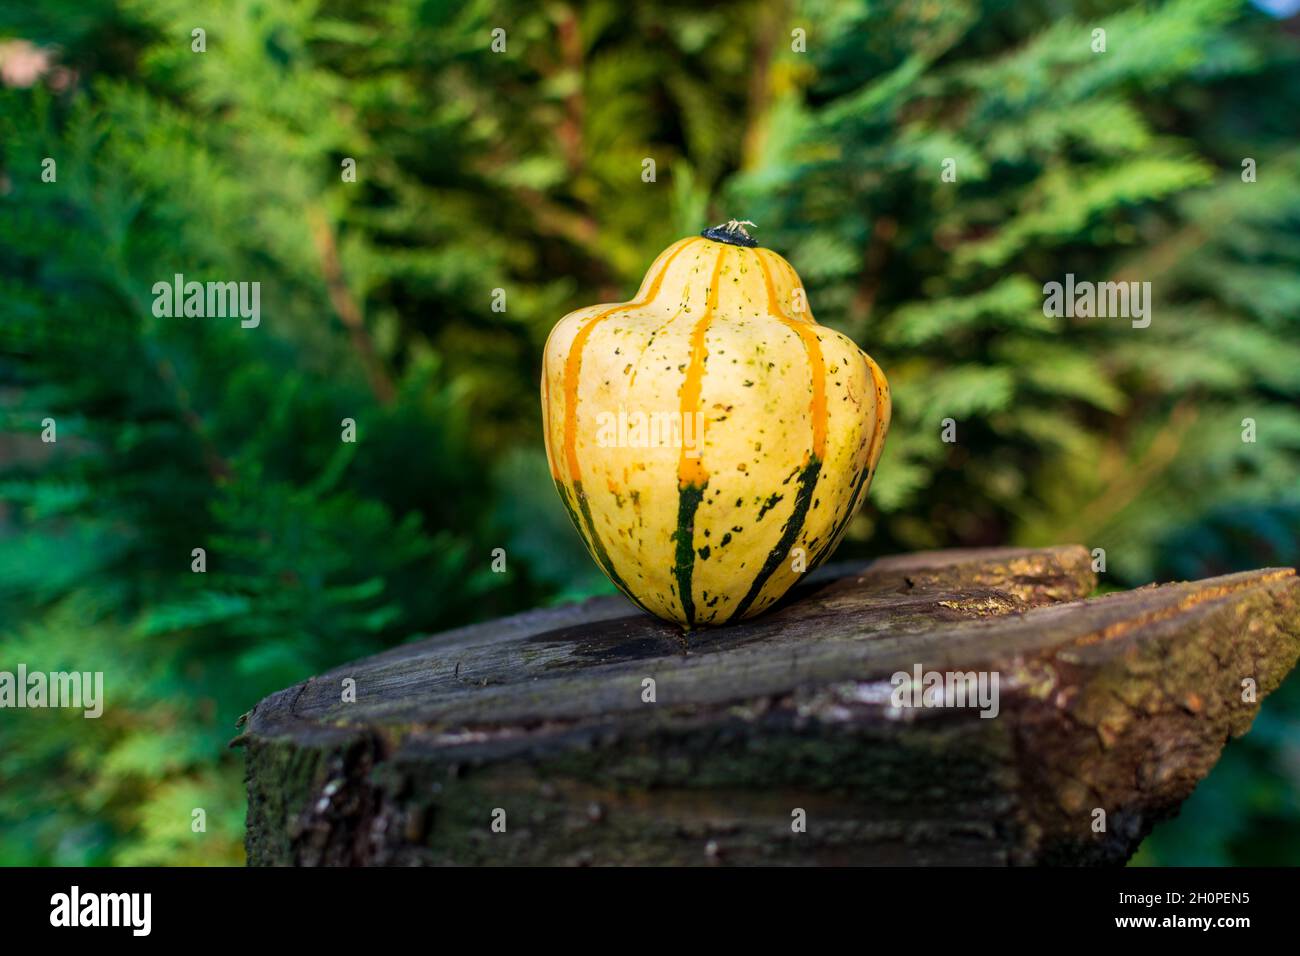 Yellow gourd or pumpkin with stripes on a wooden table in nature Stock Photo